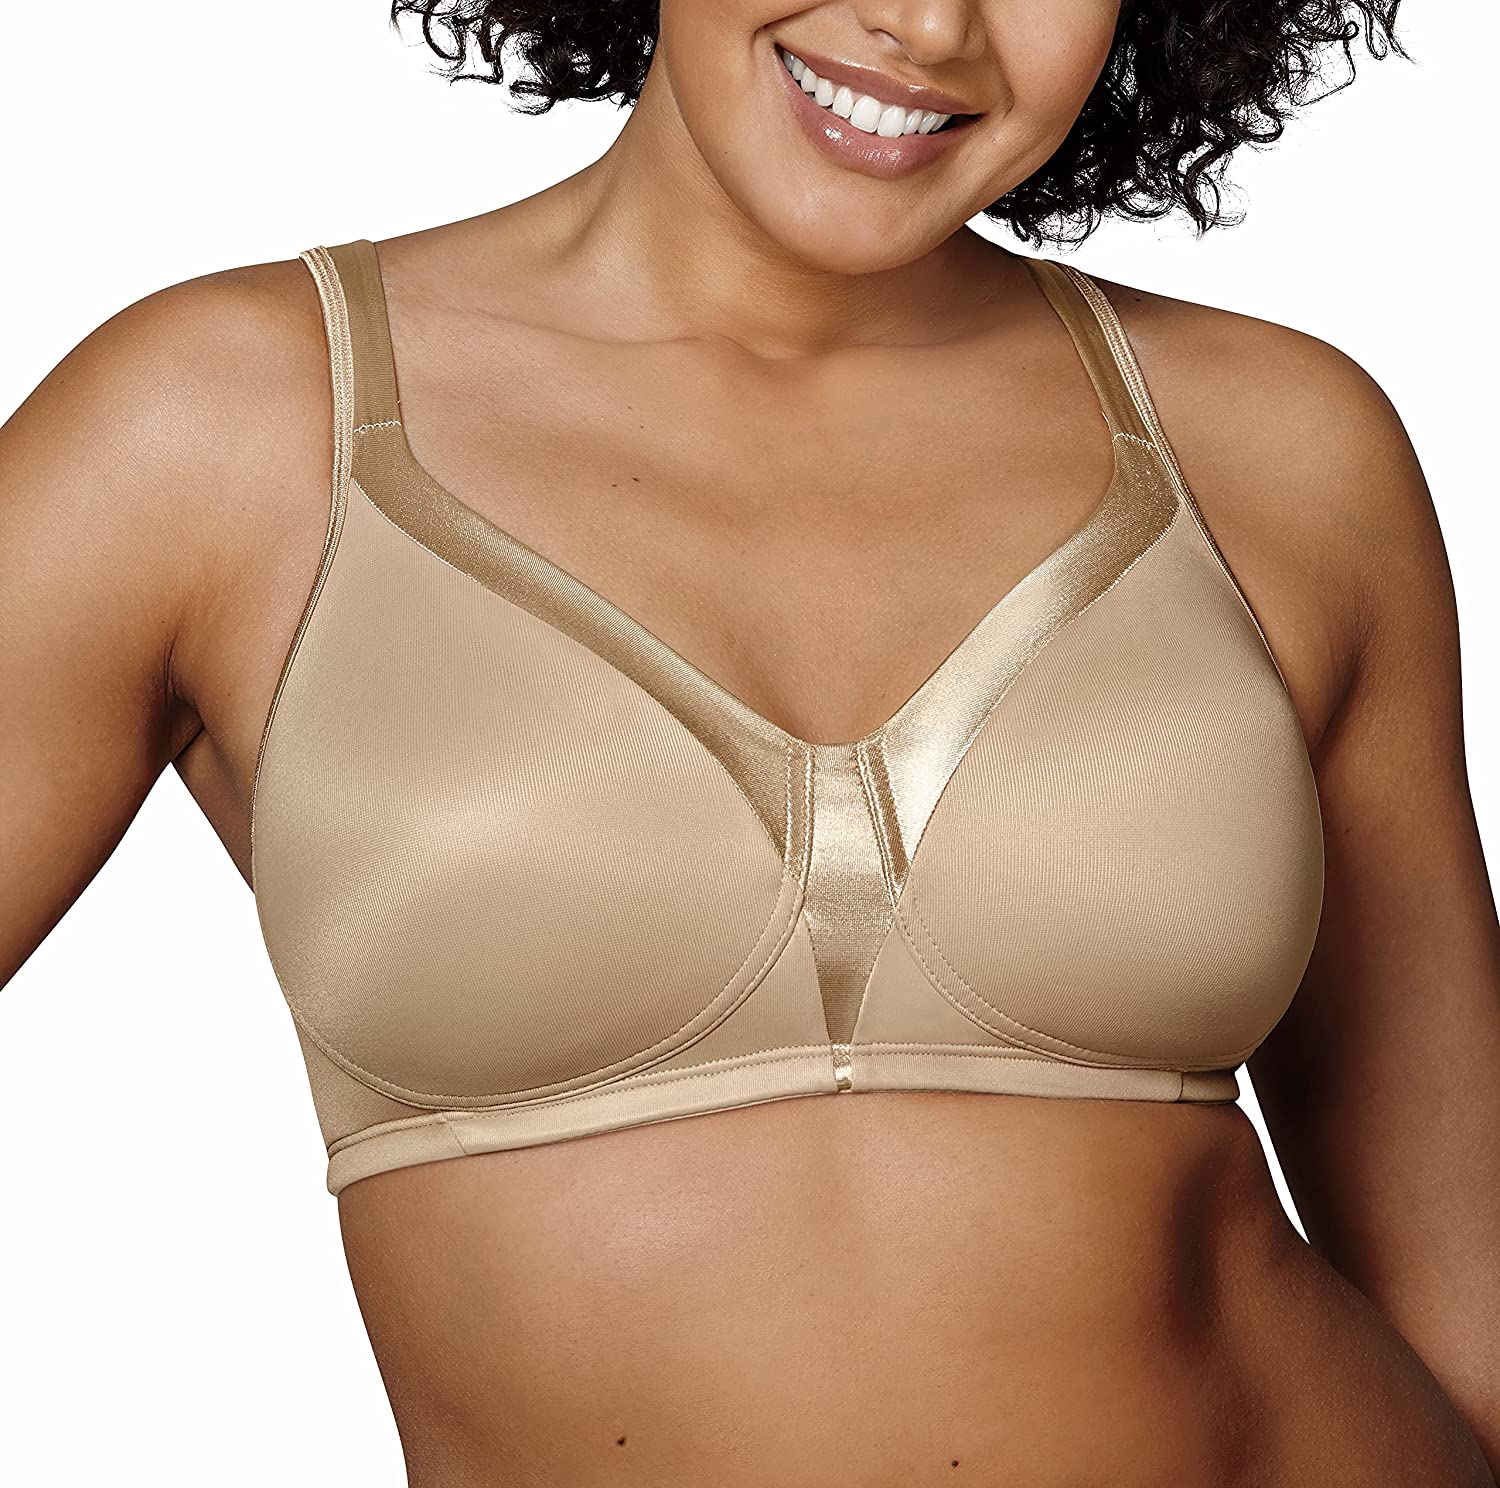 Buy Playtex Women's 18 Hour Seamless Smoothing Bra #4049,Nude,40DD at